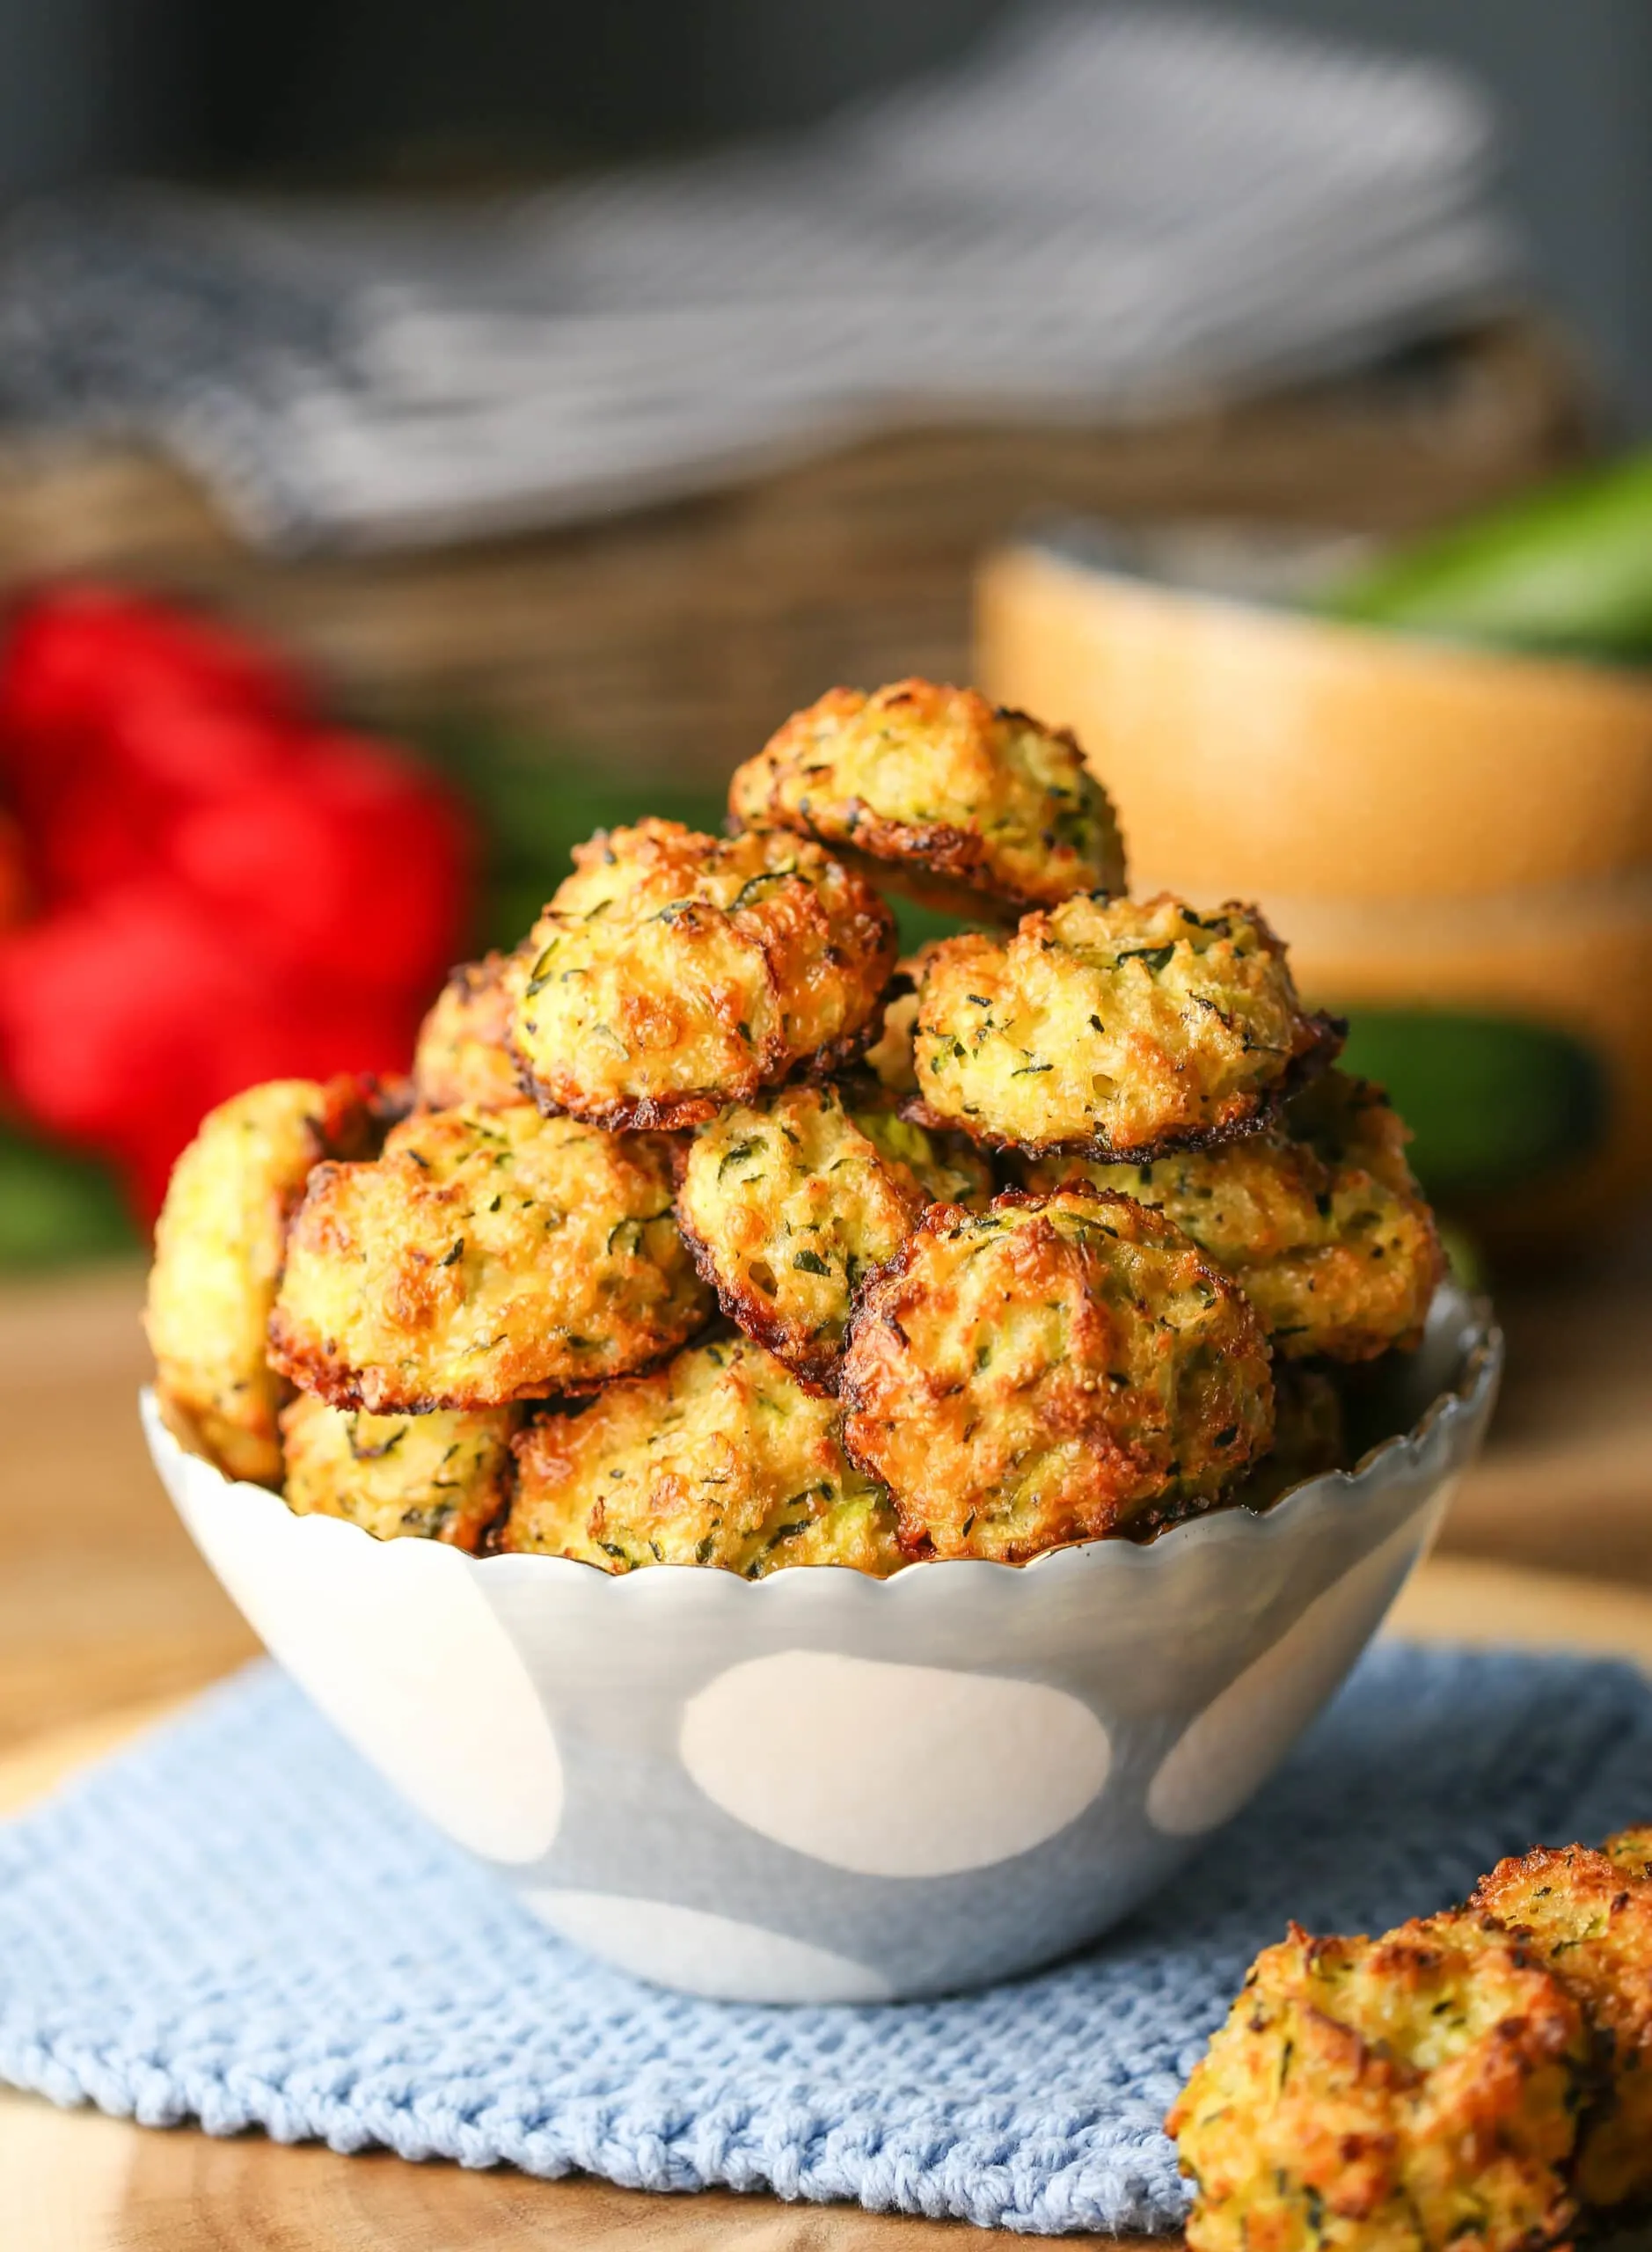 Golden-brown baked cheesy zucchini bites in a white and blue bowl.